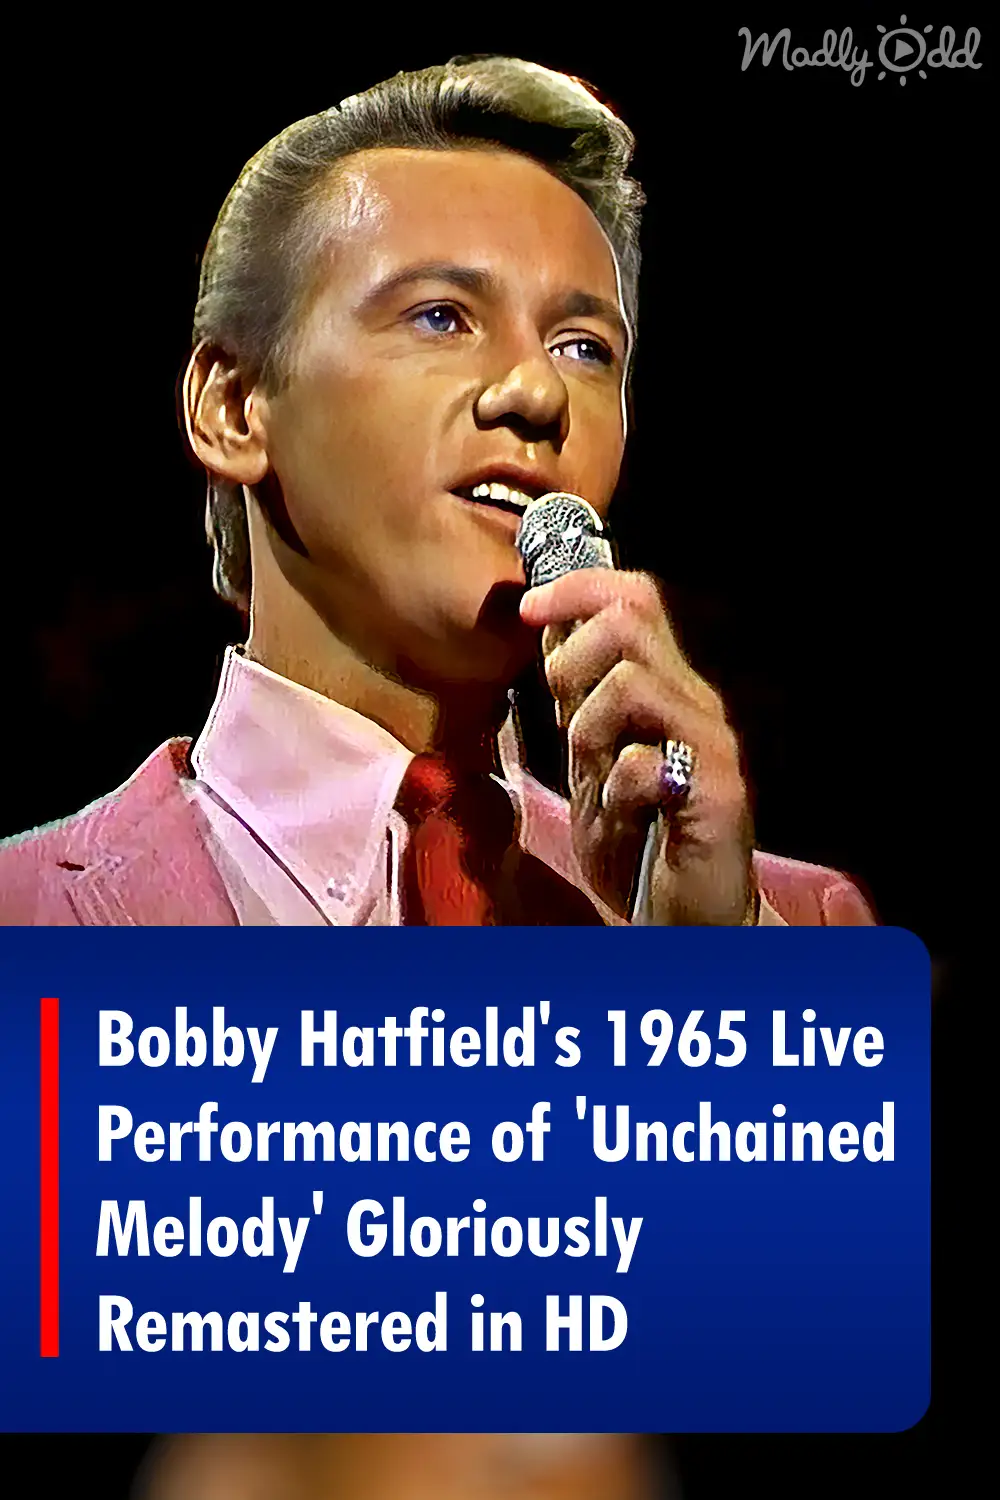 Bobby Hatfield's 1965 Live Performance of 'Unchained Melody' Gloriously Remastered in HD